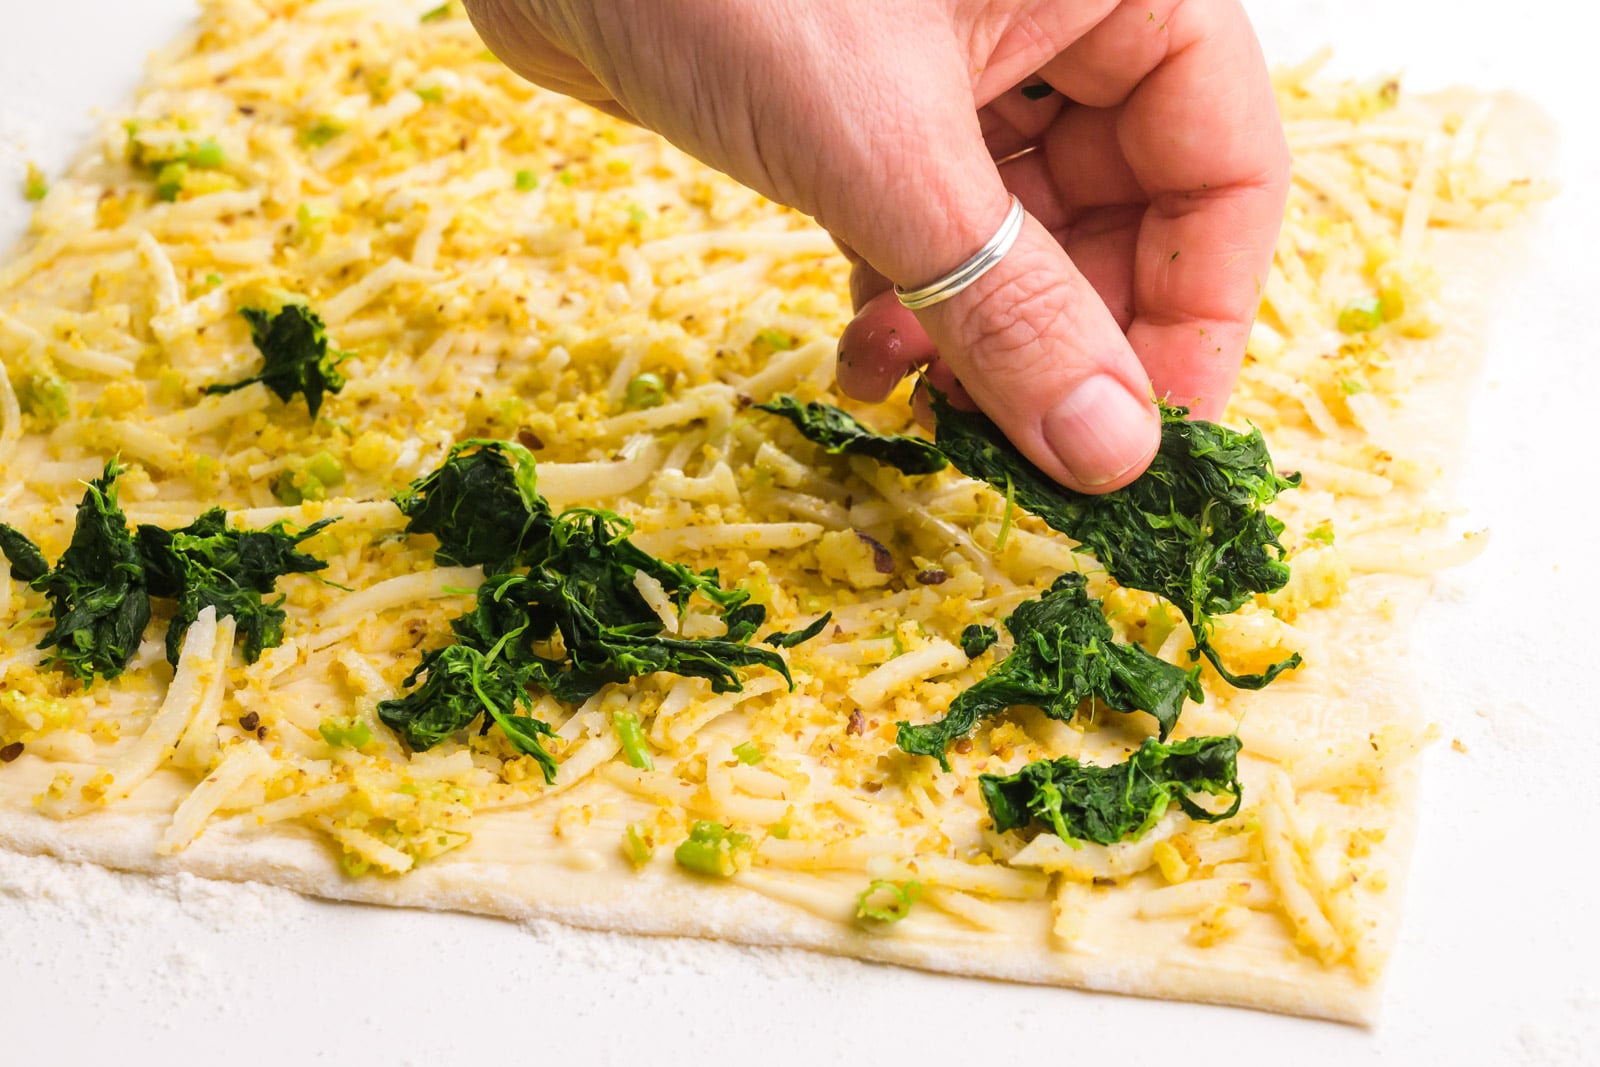 A hand distributes spinach pieces over a pastry sheet lined with cheese and butter.